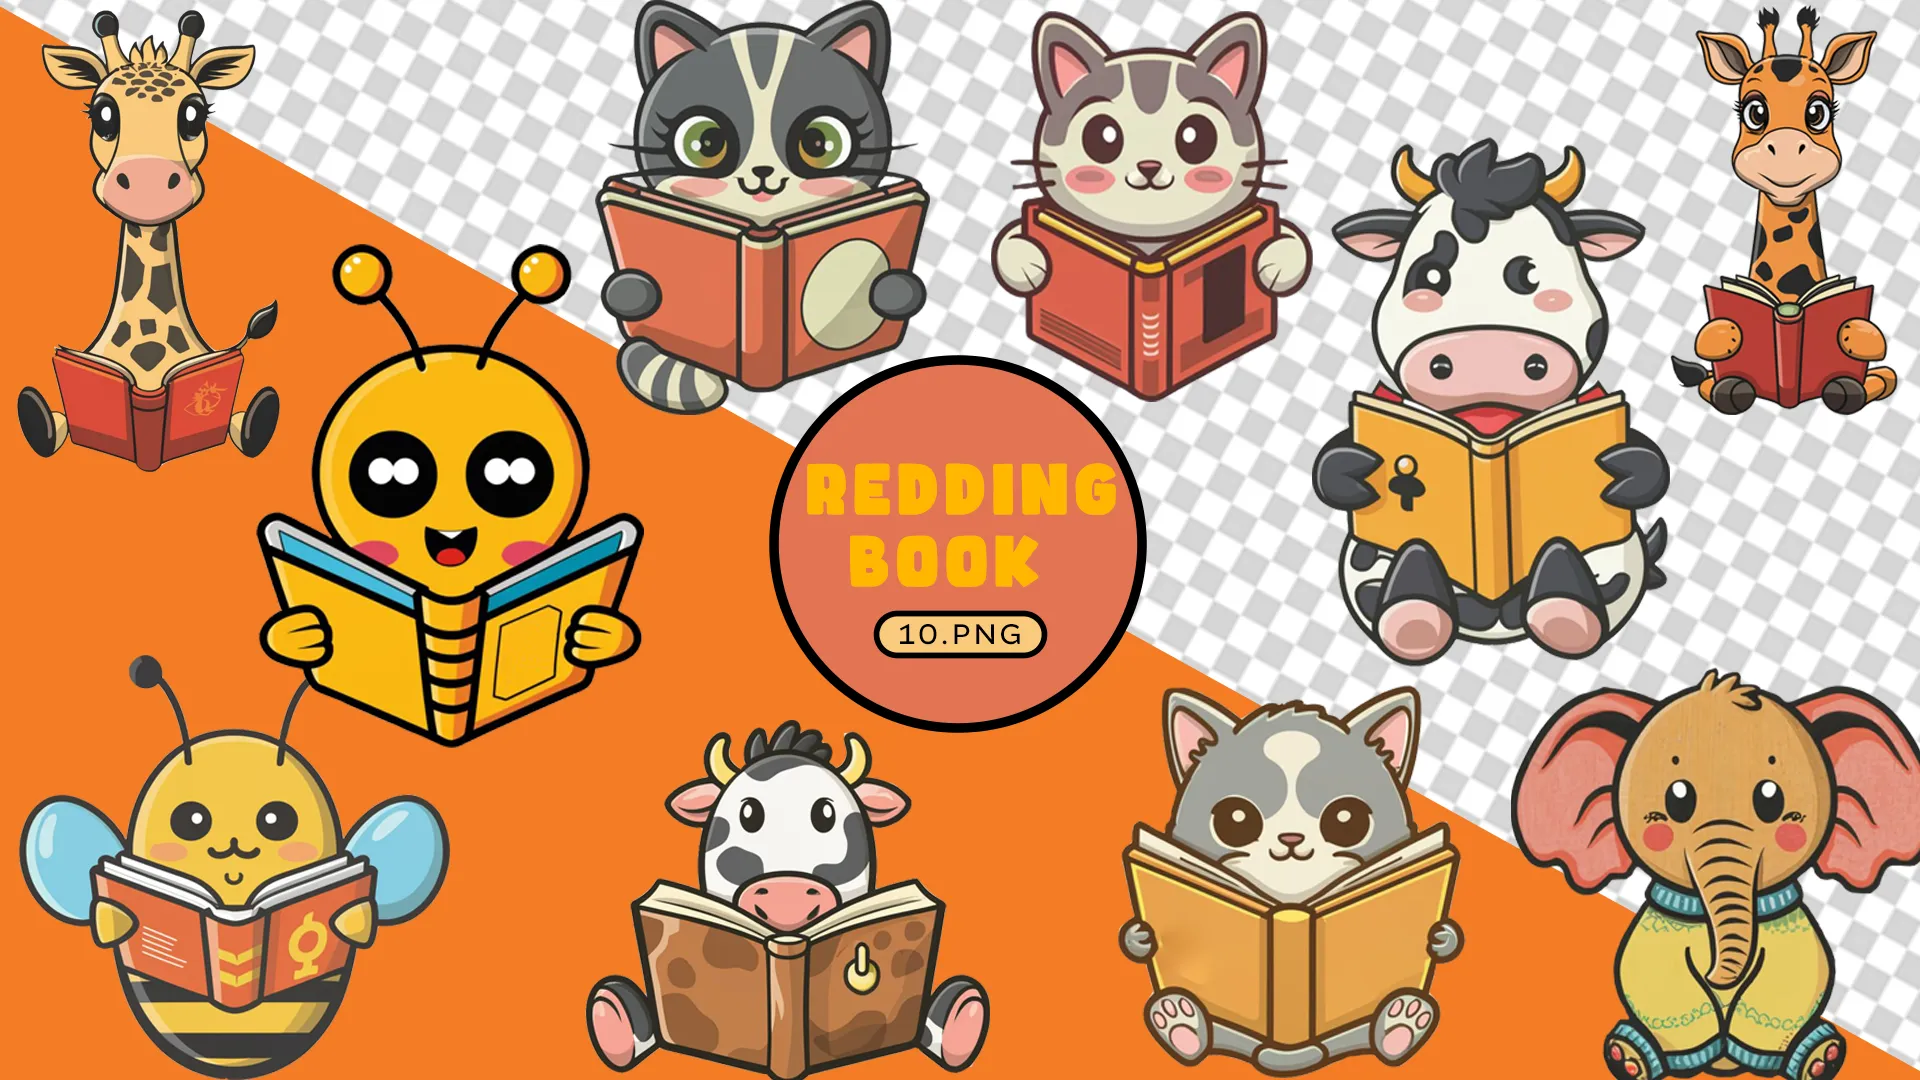 Cute Characters 3D Pack for Children's Books image